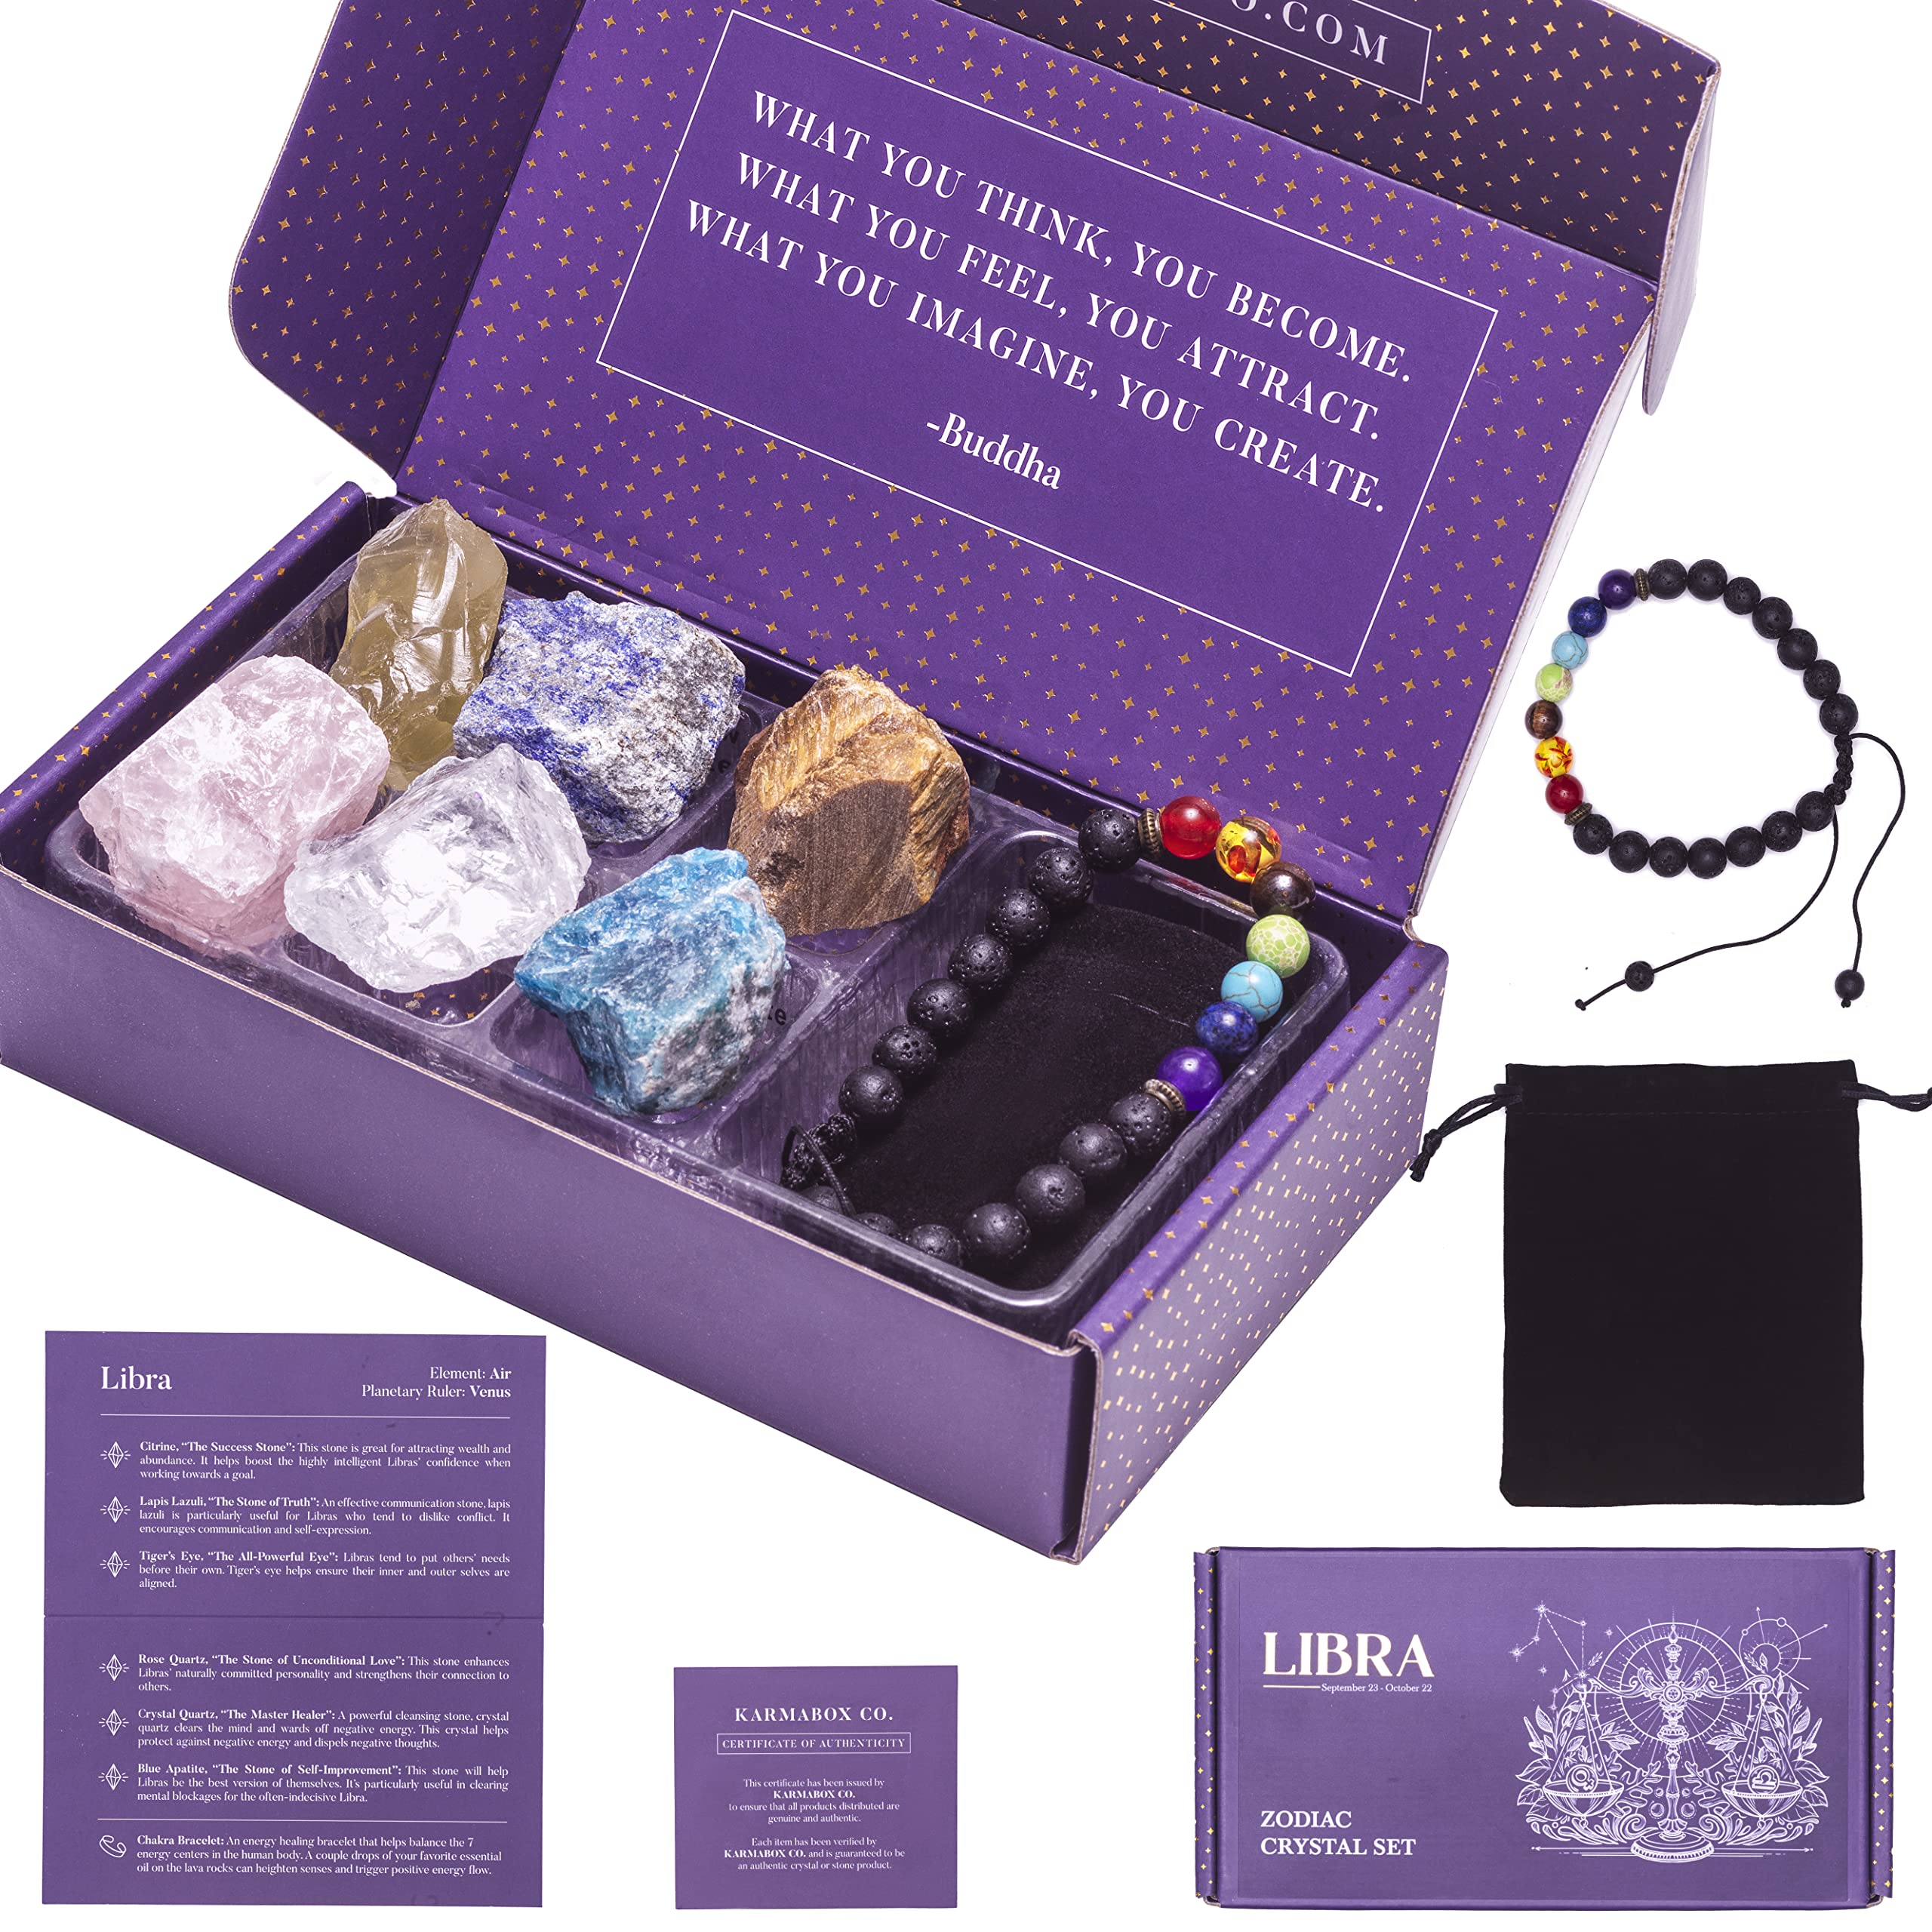 Top more than 134 crystal image gifts best